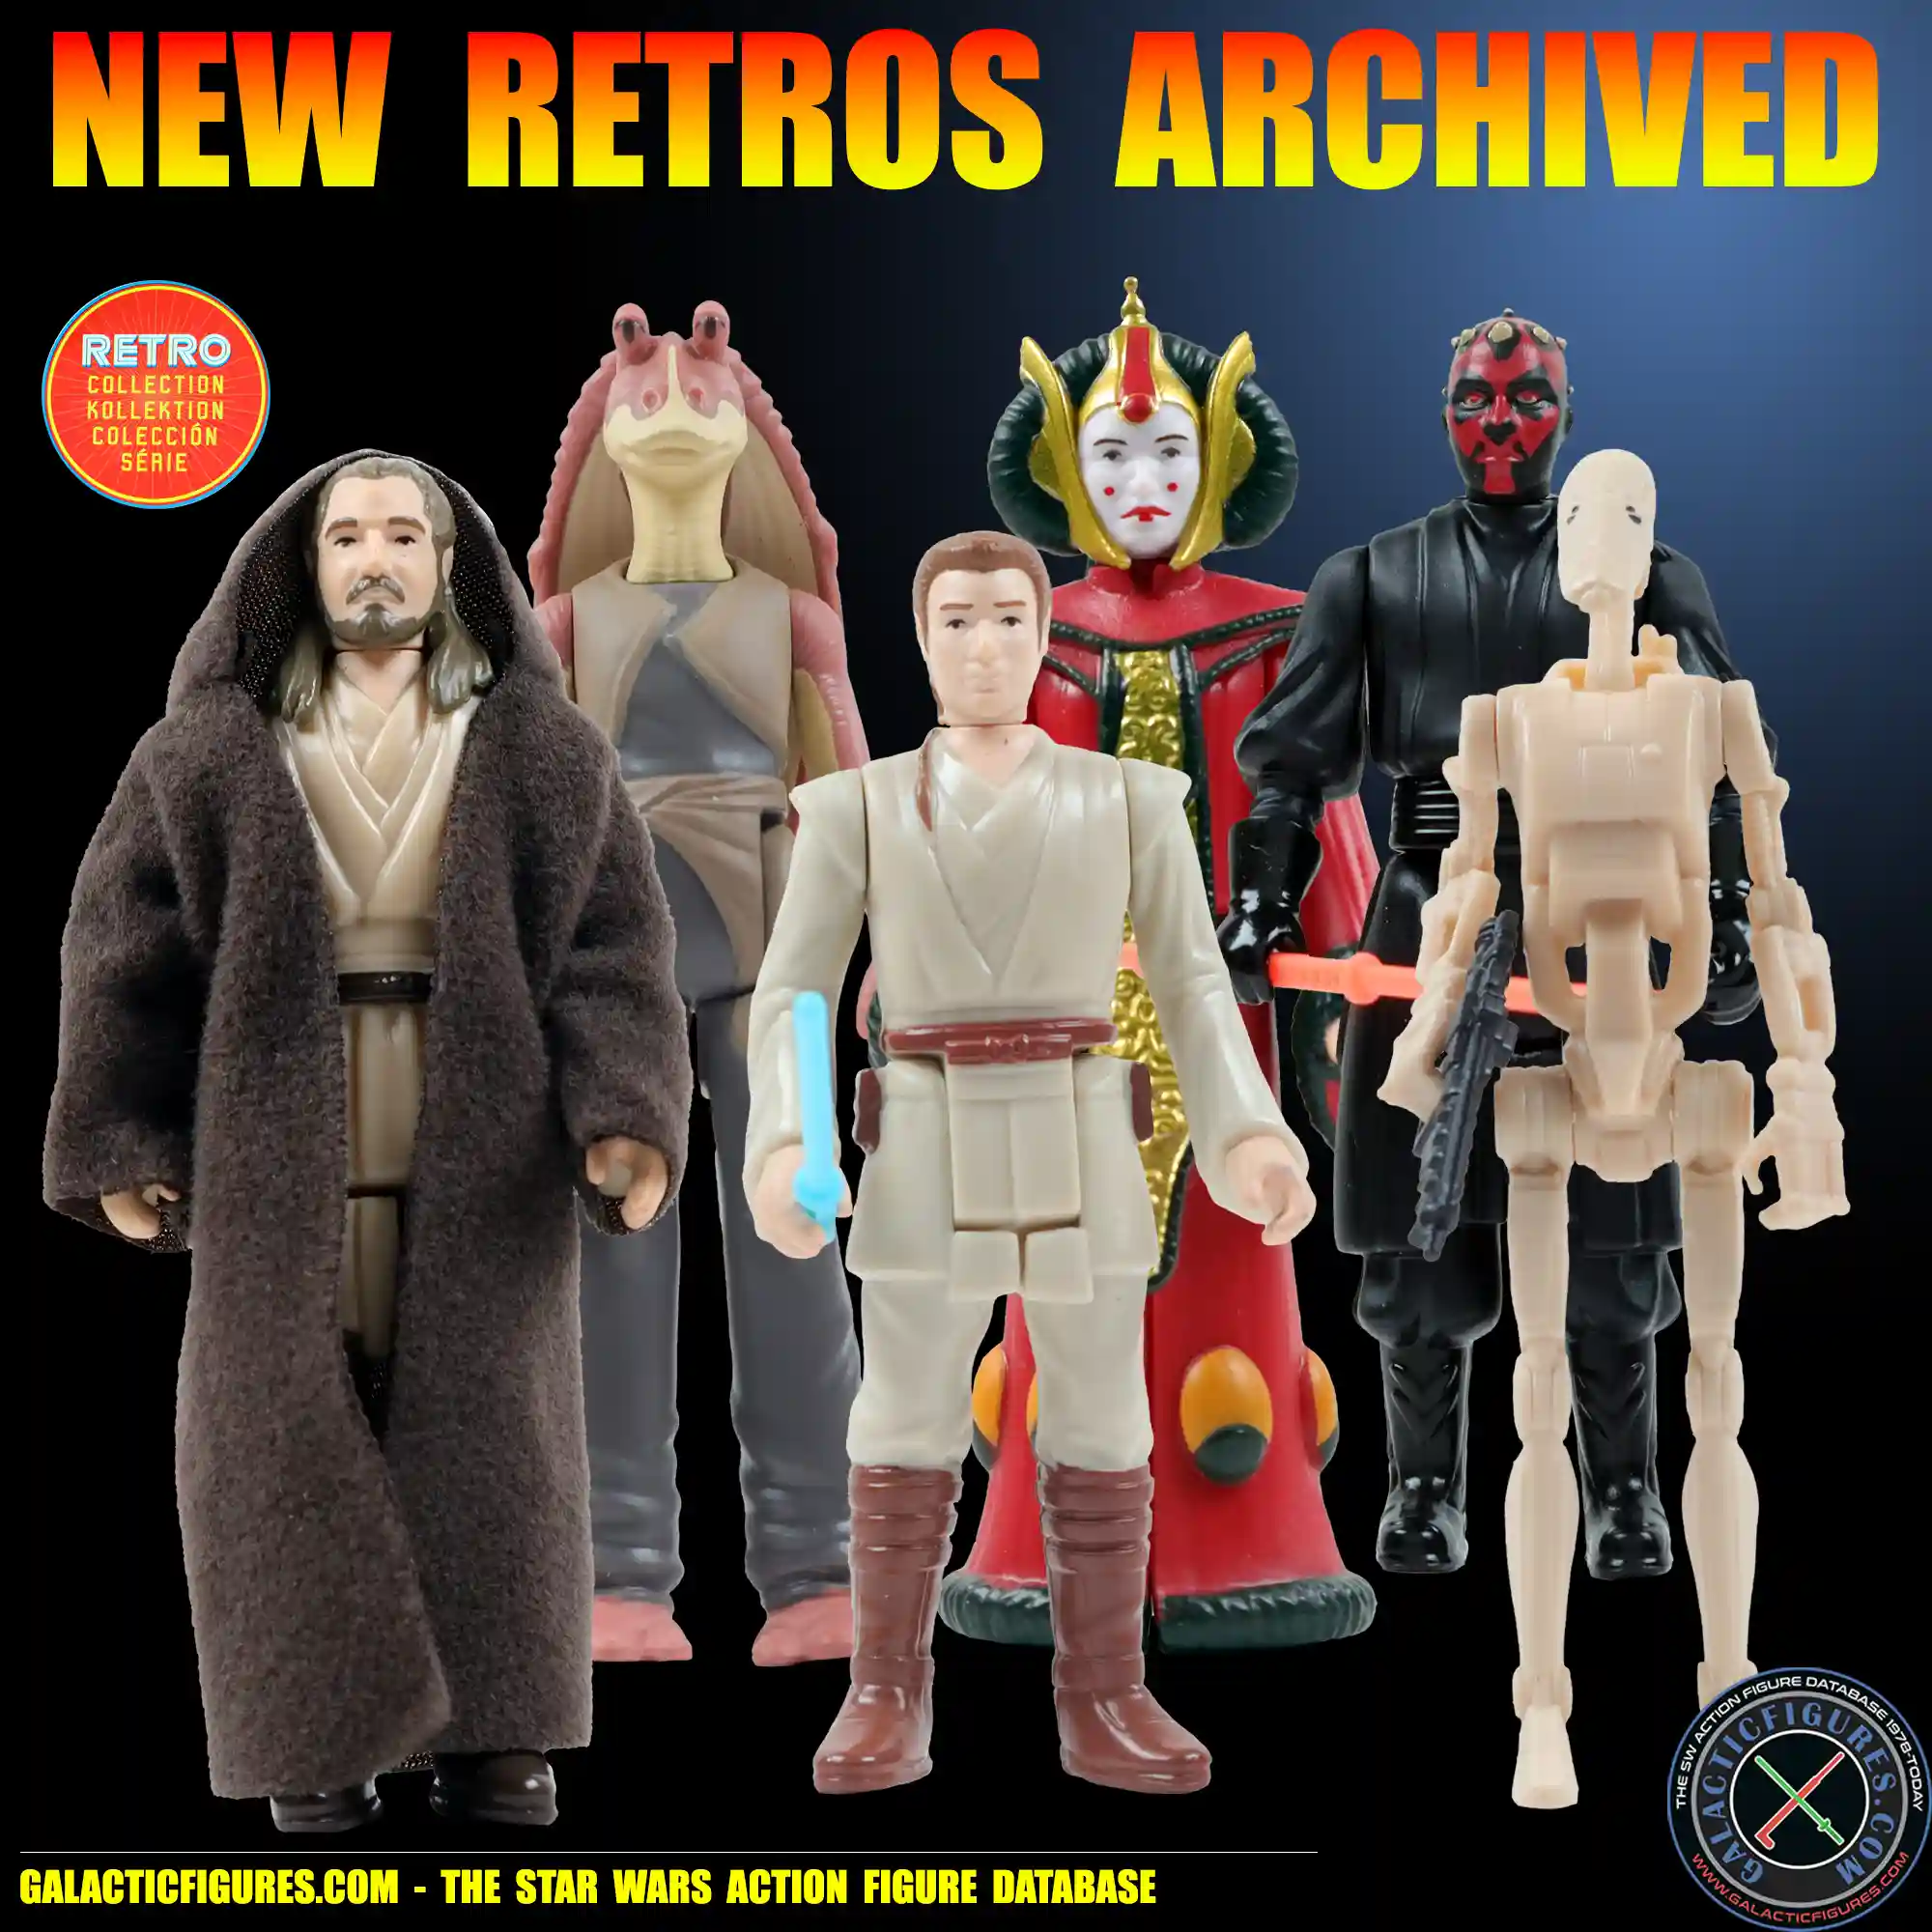 The Phantom Menace Retro Collection 6-Pack Archvived